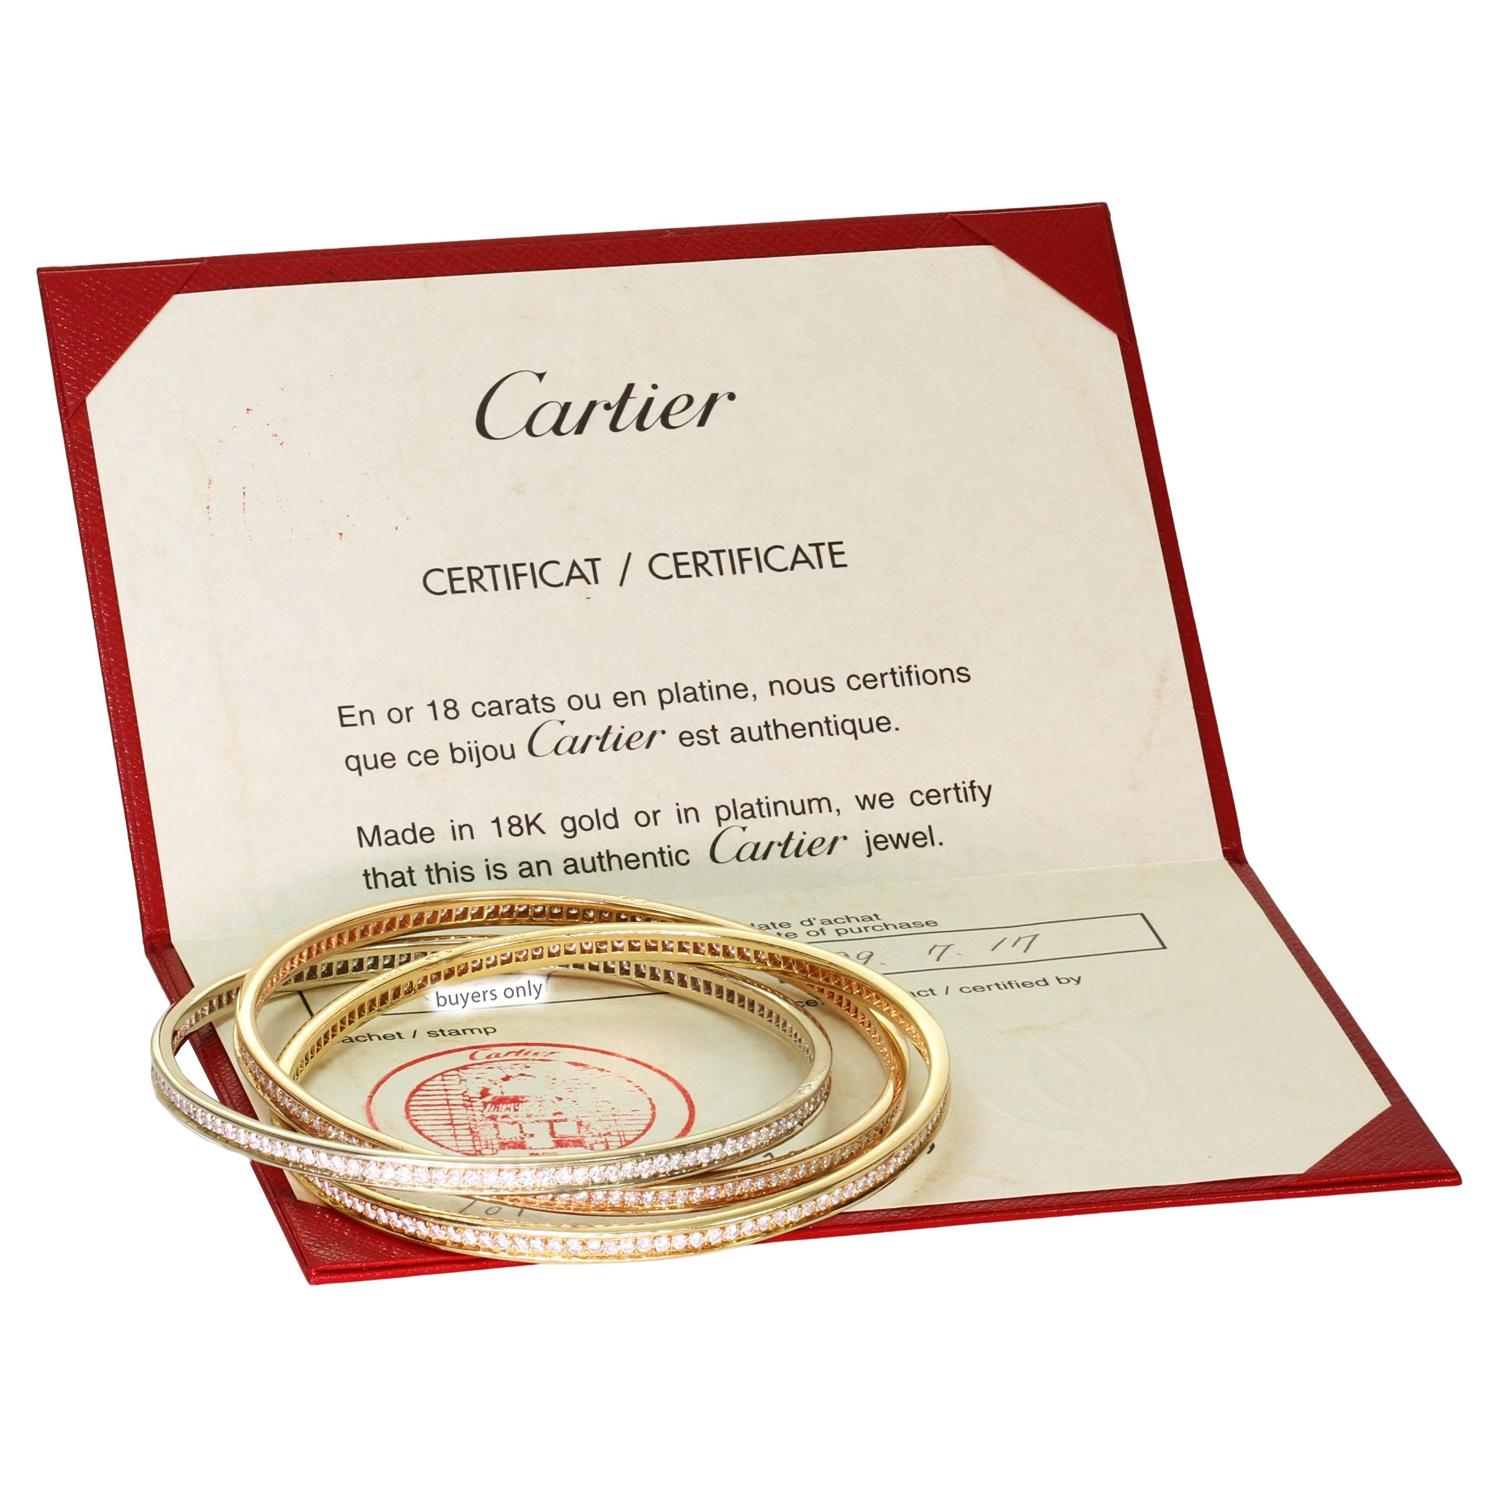 This gorgeous Cartier bracelet from the classic Trinity collection features 3 interconnected bangles crafted in 18k yellow, white, and rose gold. All three bangles are set with with E-F VVS1-VVS2 brilliant-cut round diamonds weighing an estimated